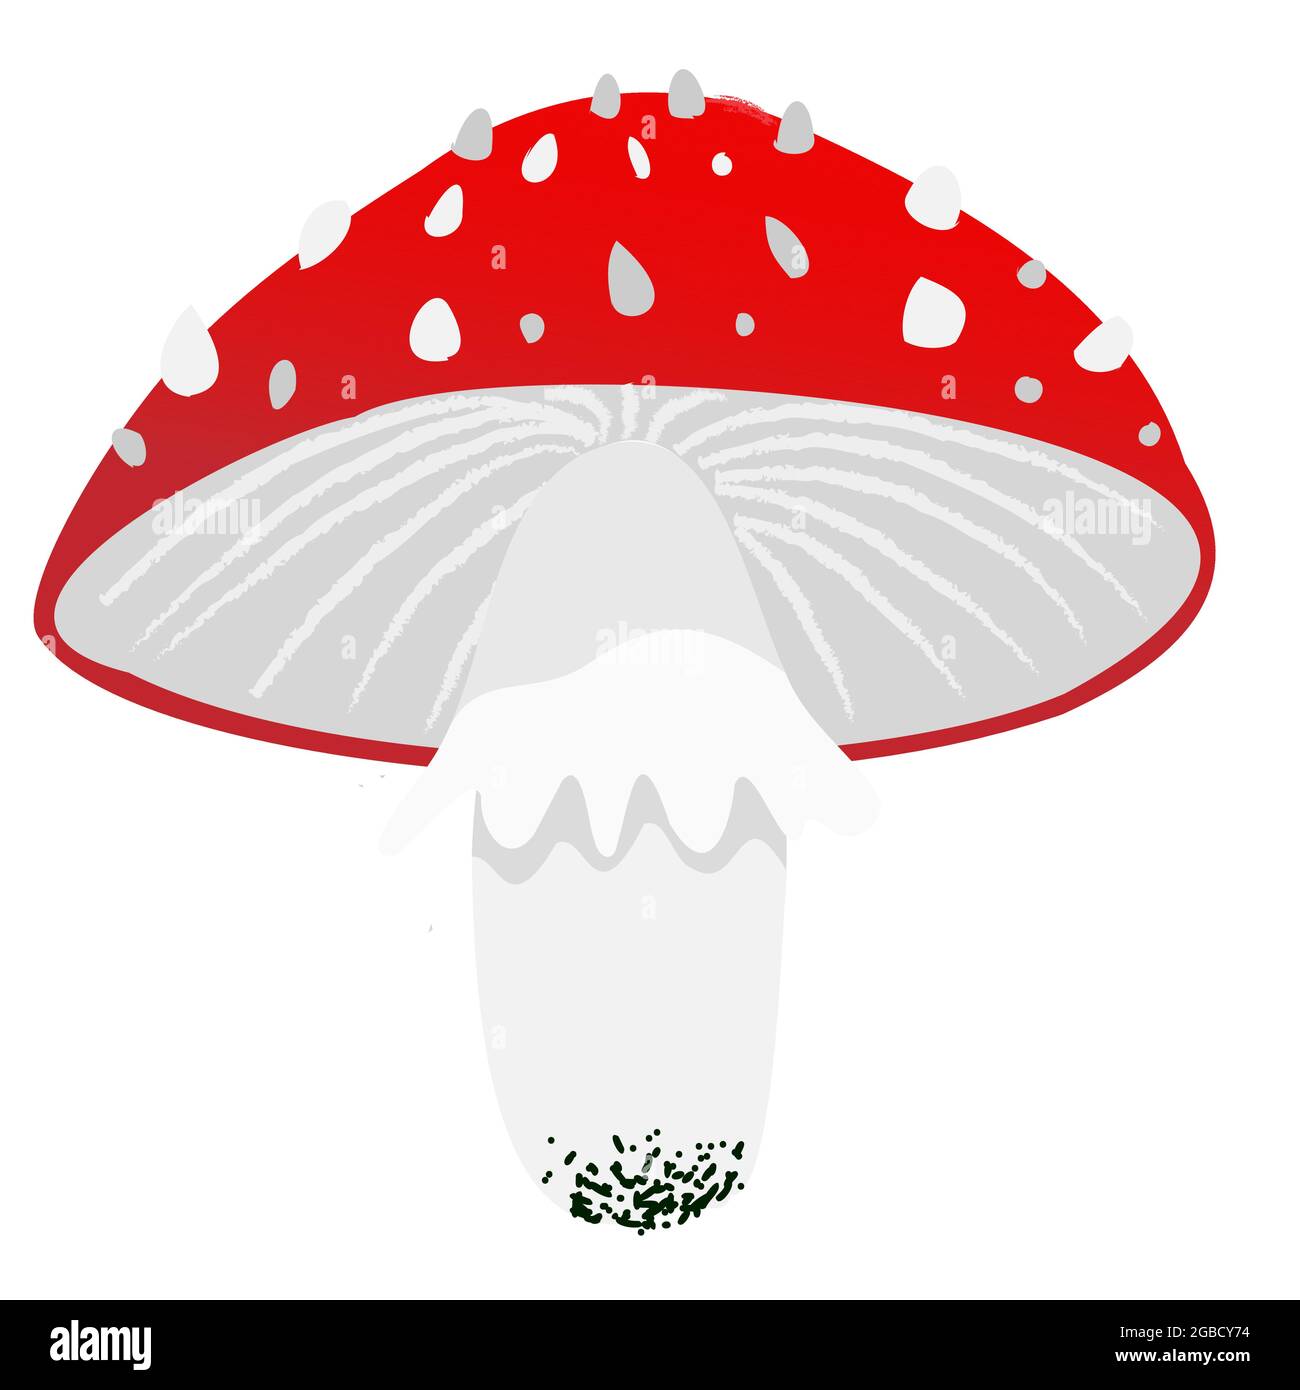 Amanita red mushroom in cartoon flat simple style. Vector illustration clipart isolated on white background Stock Vector